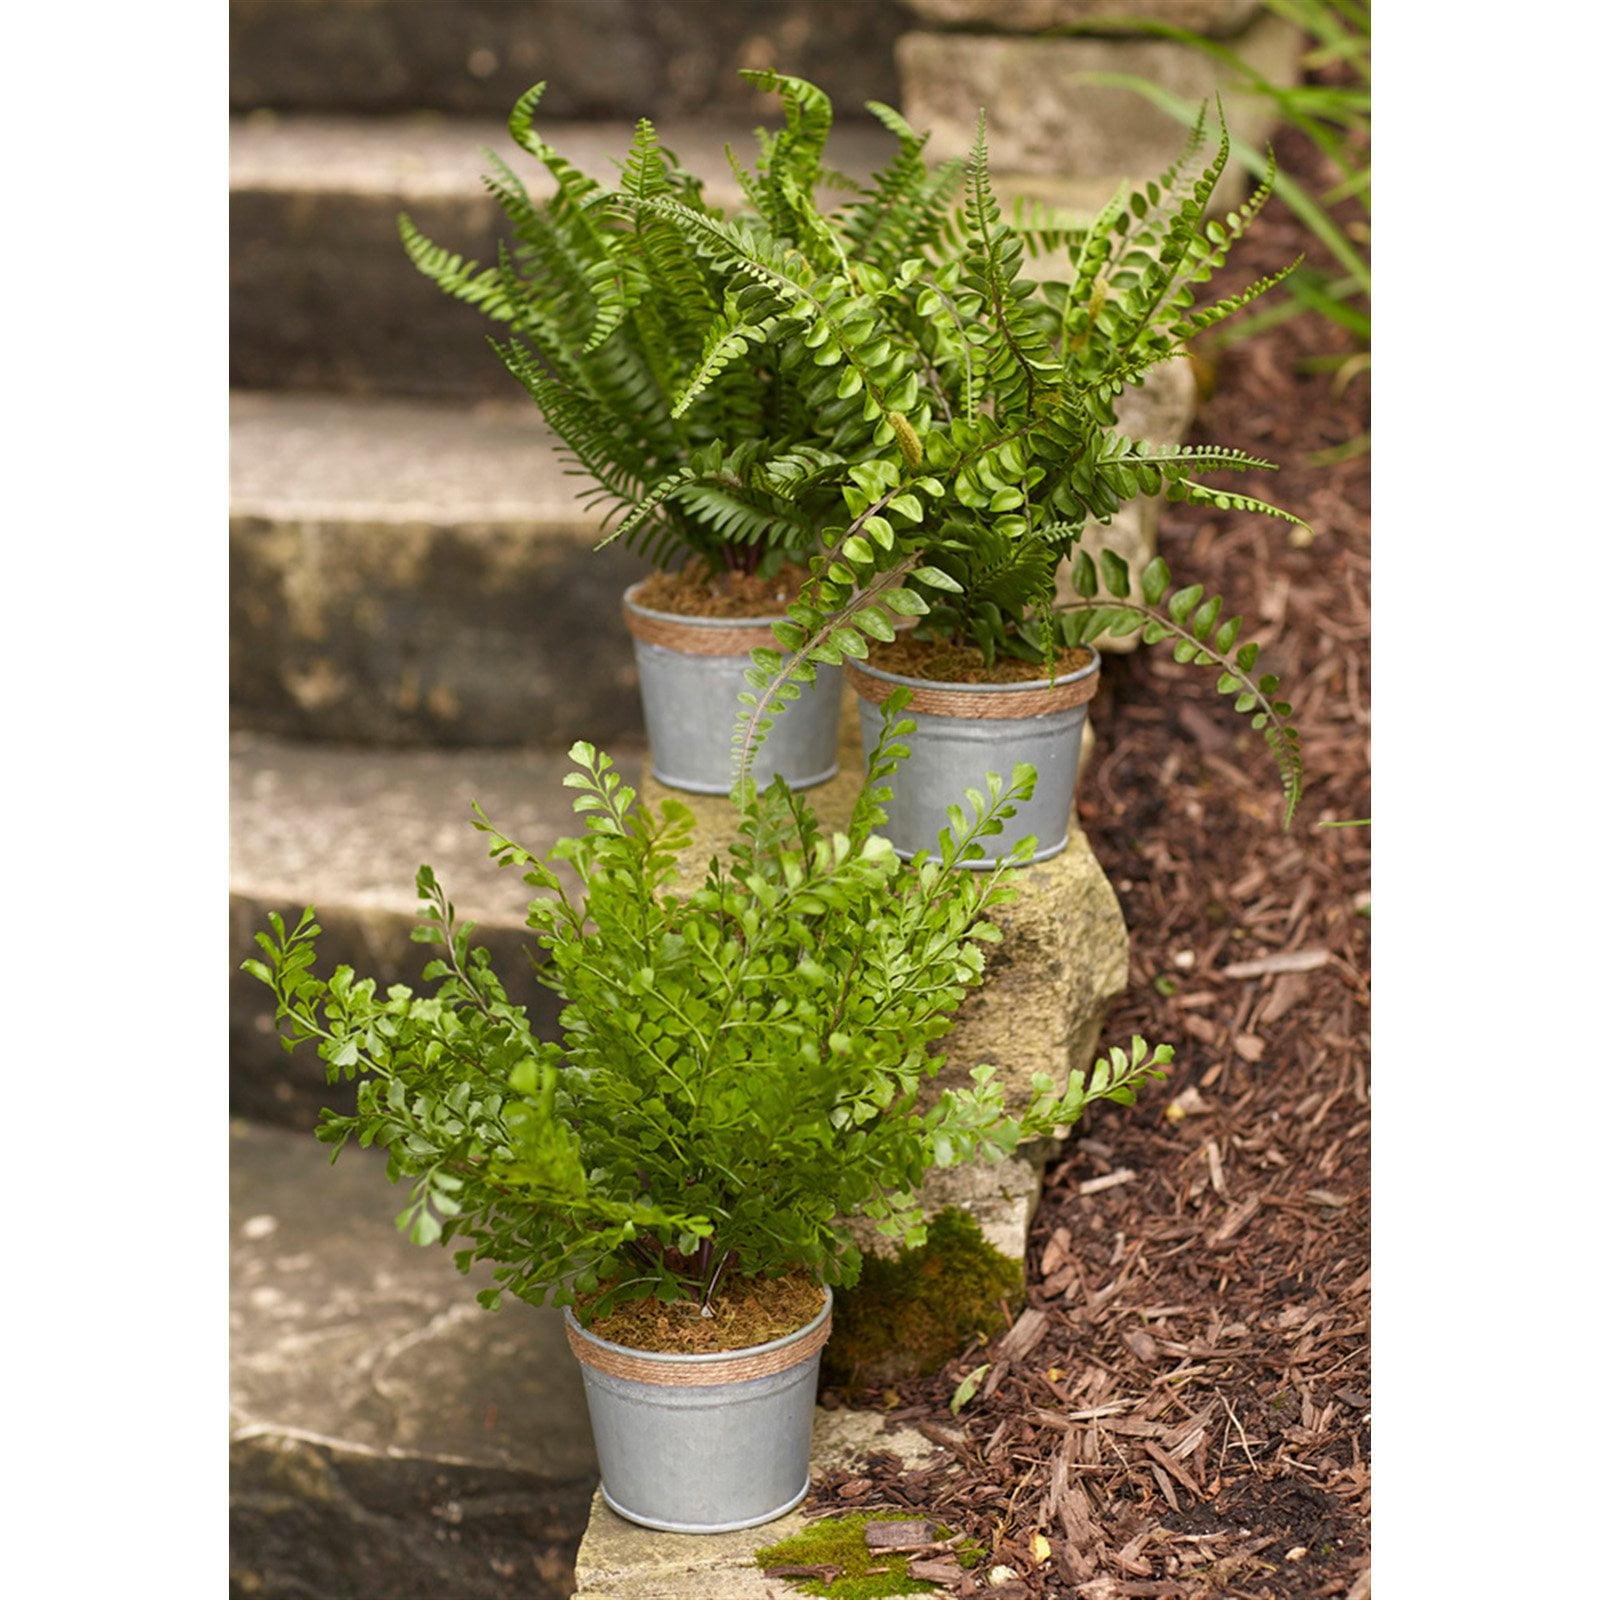 Variegated Green Plastic Potted Fern Trio with Silver Bucket Pots